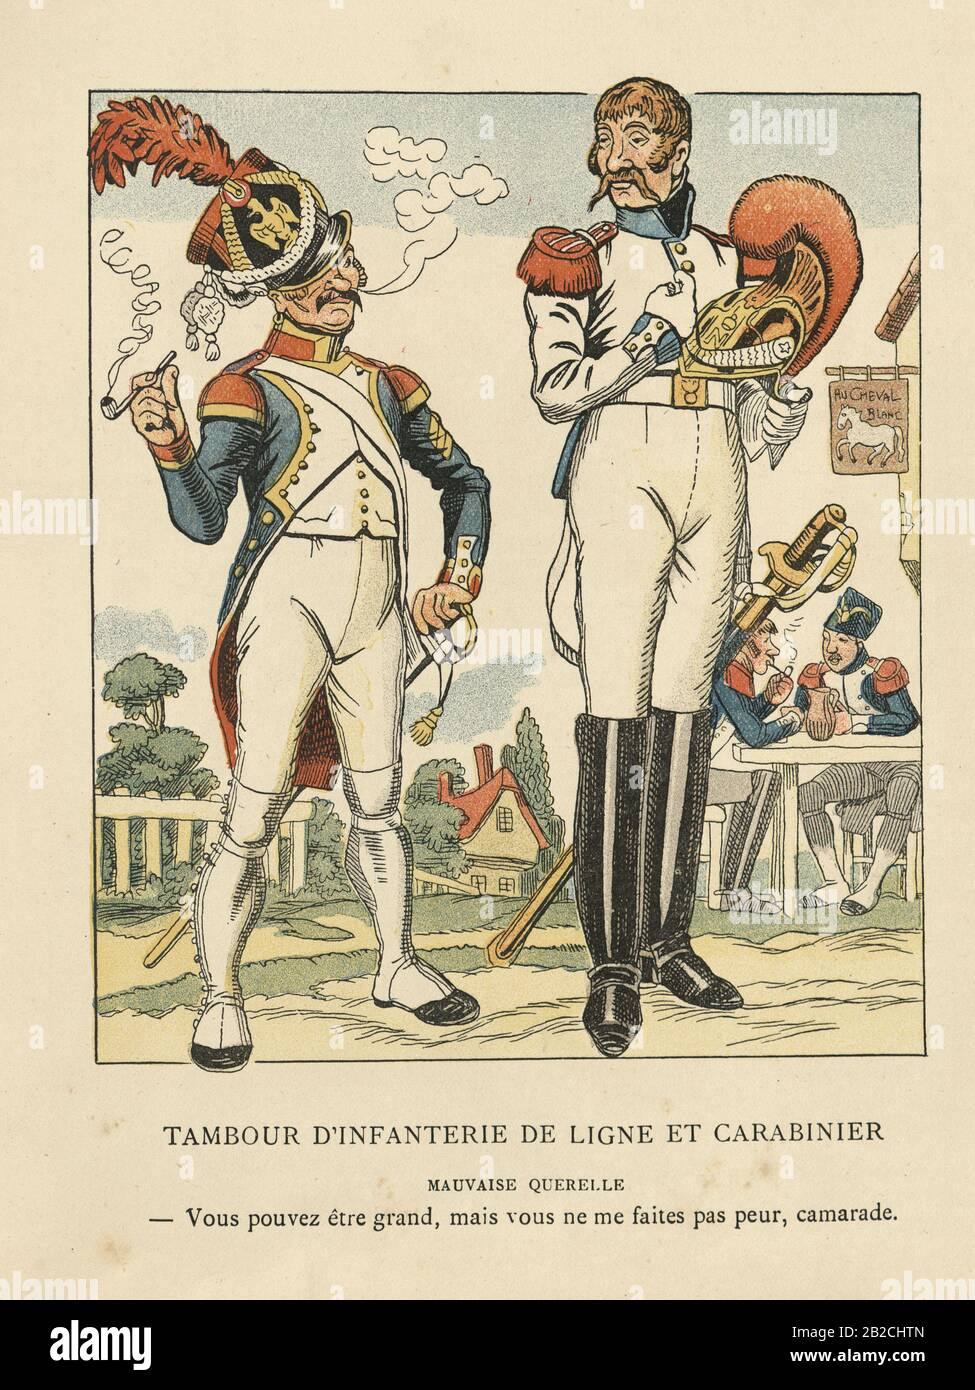 French soldiers line infantry of a rifleman(carabinier) (Tambour d'infanterie de ligne et carabinier), 1806 during the Napoleonic Wars Stock Photo